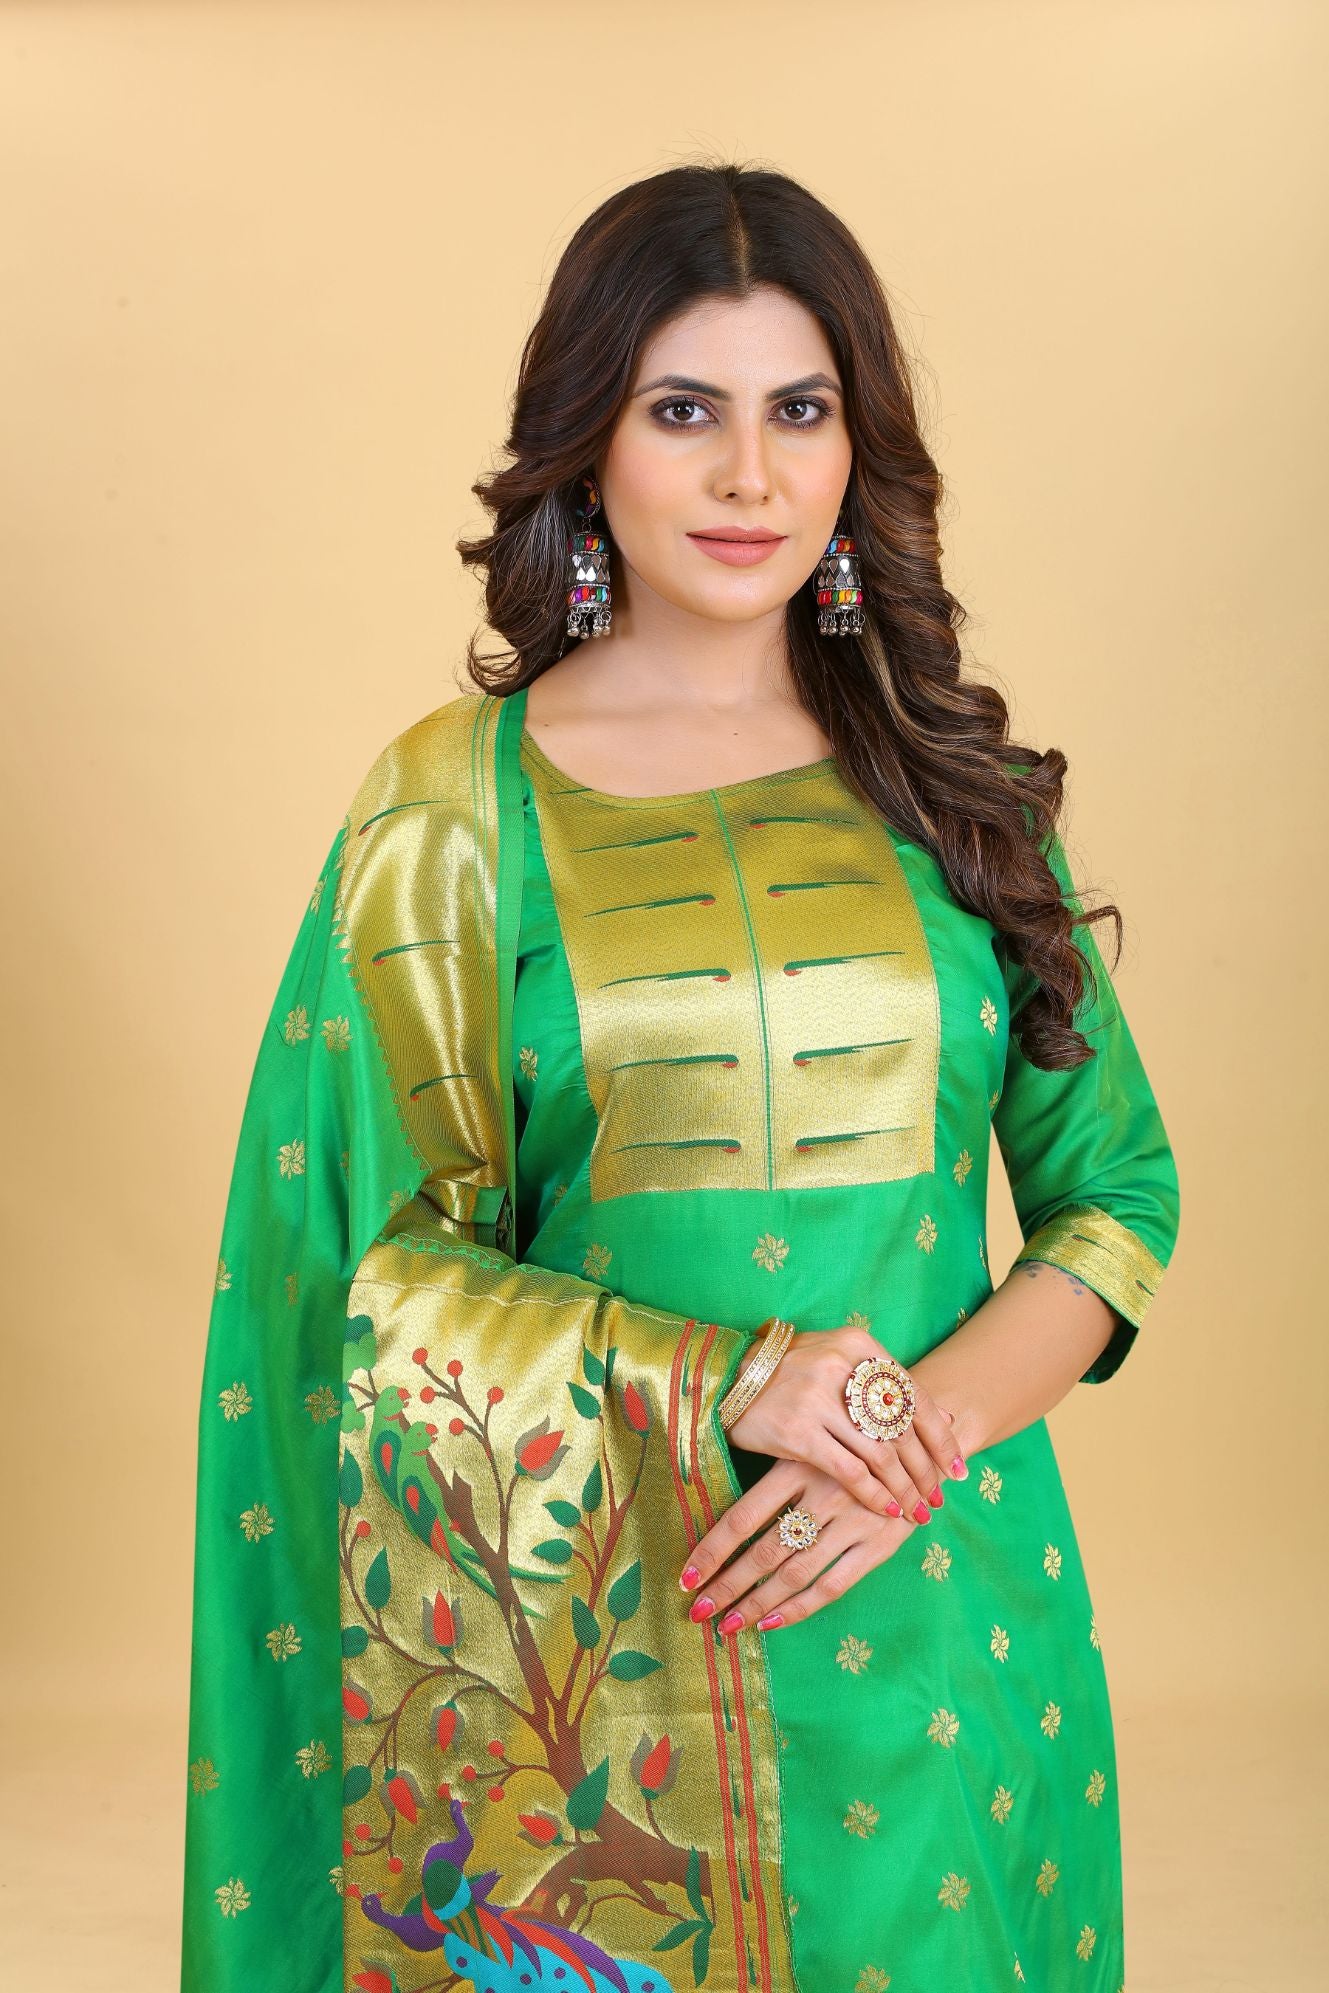 Green Color Paithani Style Design latest fashion in indian suits